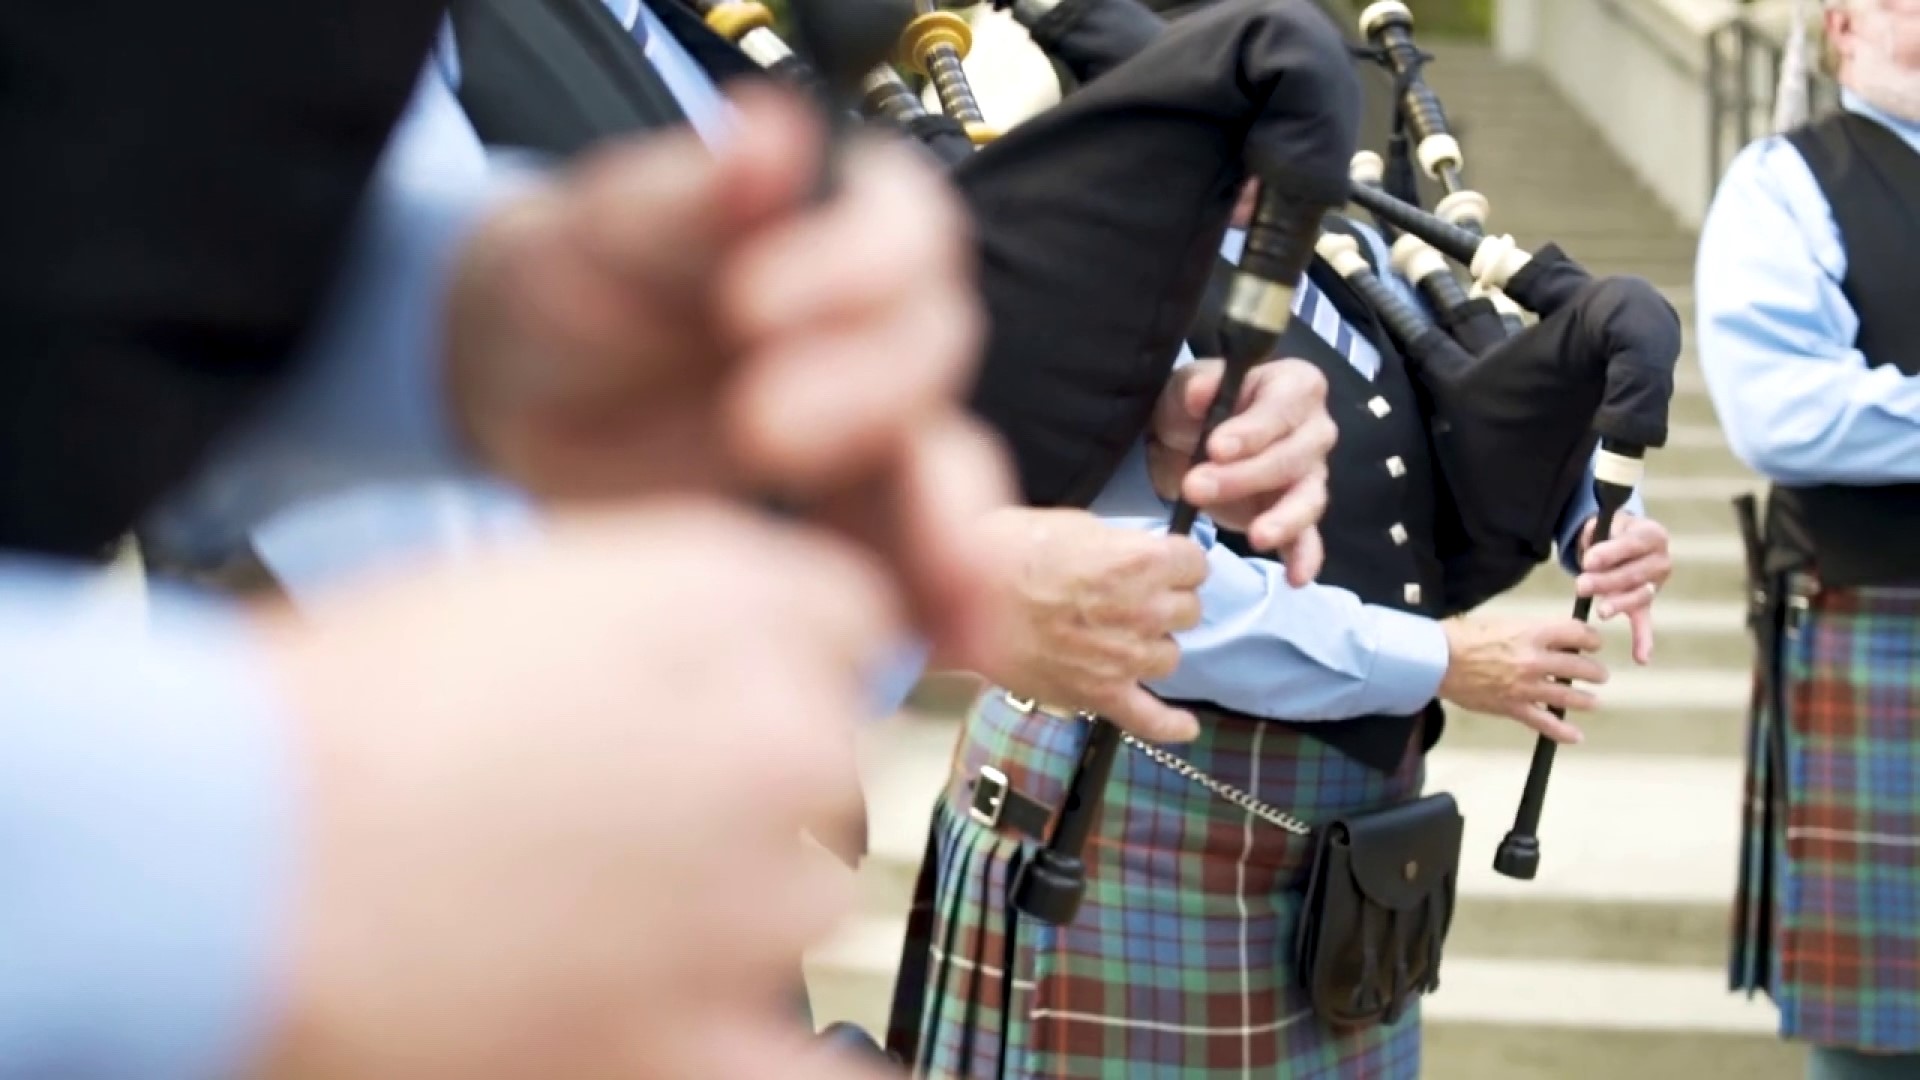 A new bagpiping course will teach students how to play a Scottish tradition. The course is the first of its kind in the region.